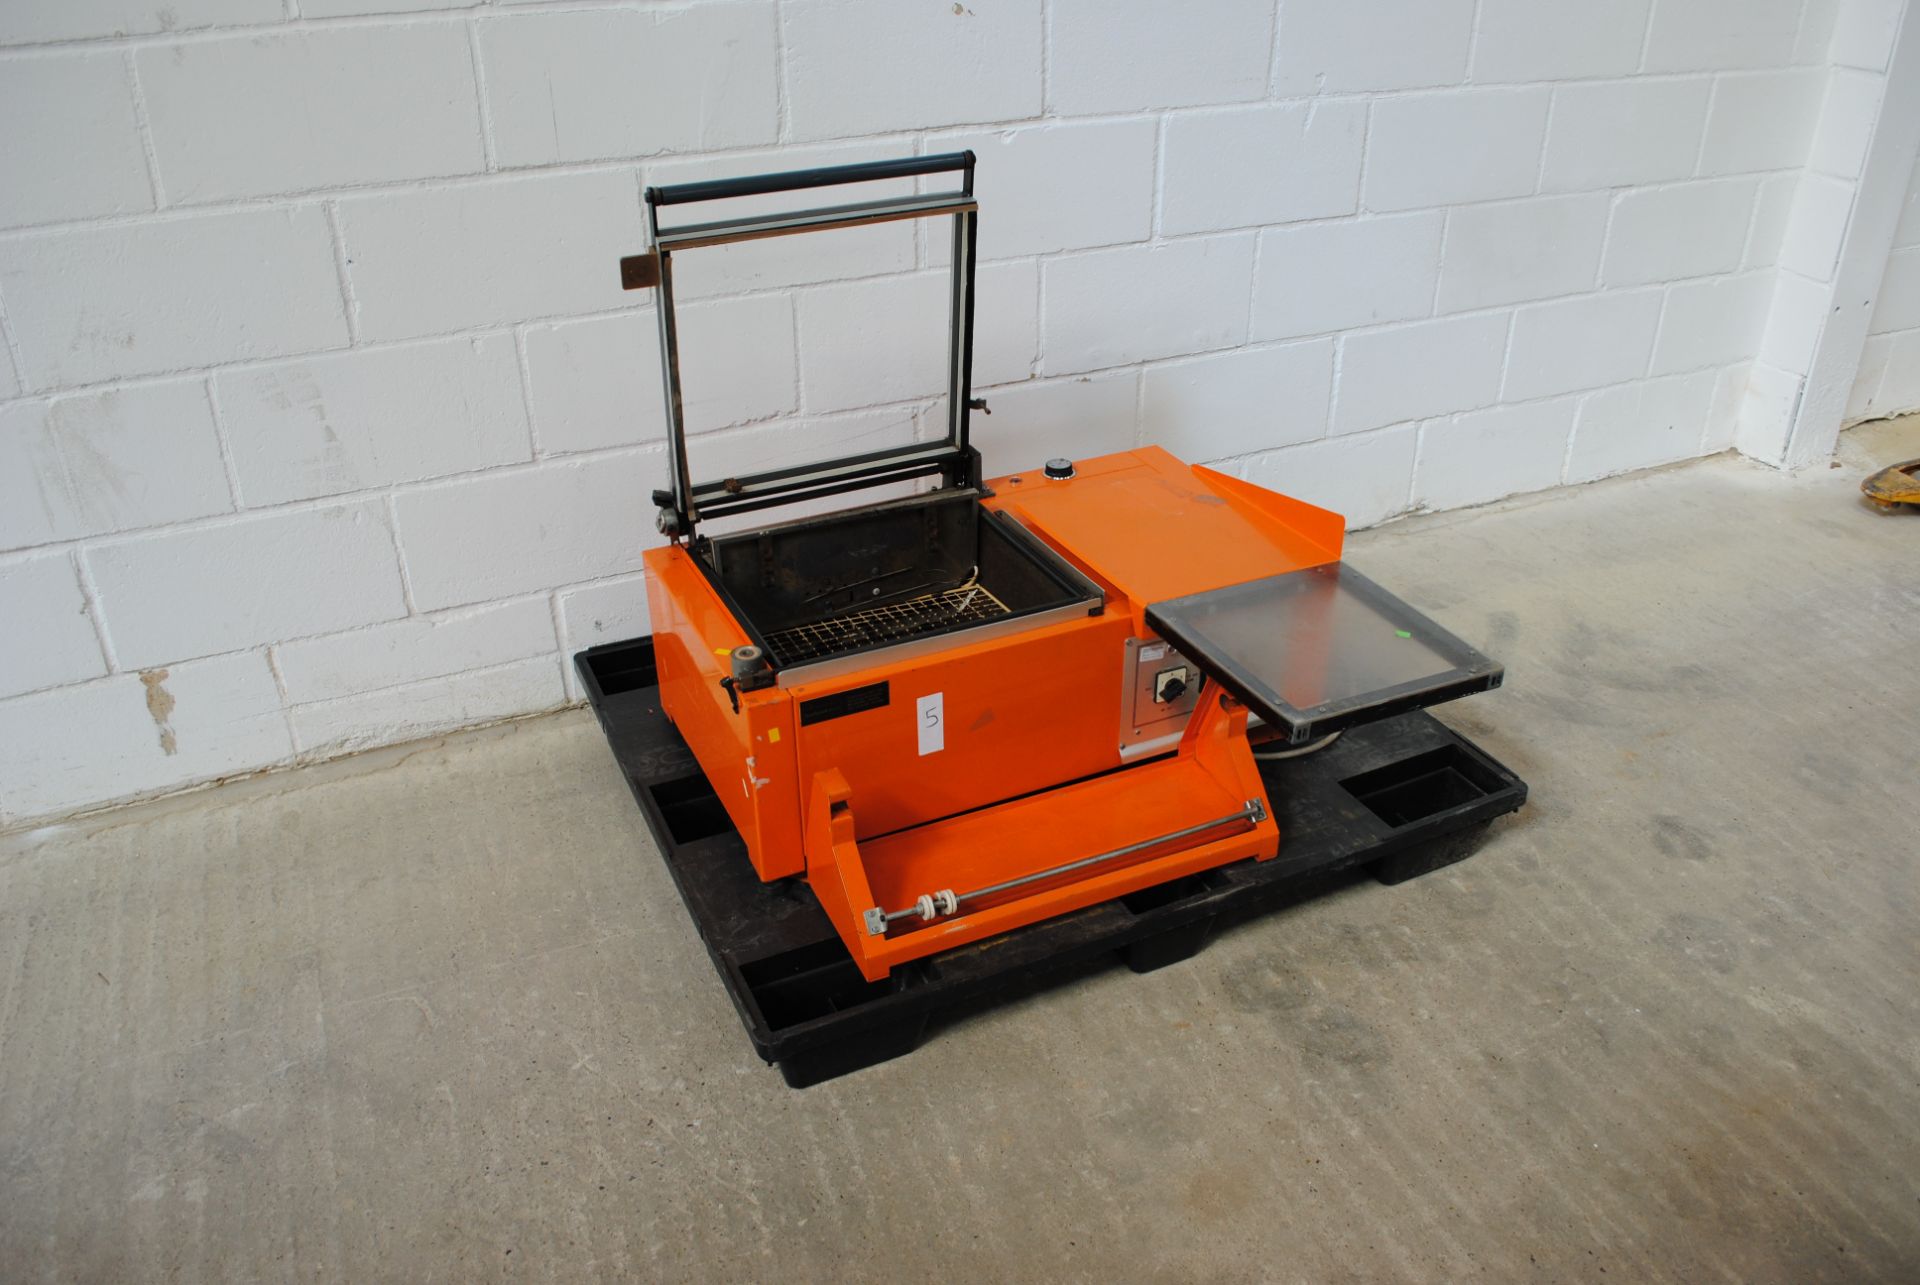 Quick Pack Ltd Model-3458 Semi Automatic Shrink Wrapping Machine Min:75 V.220/240 IPH KW-3.25 HZ. - Image 3 of 5